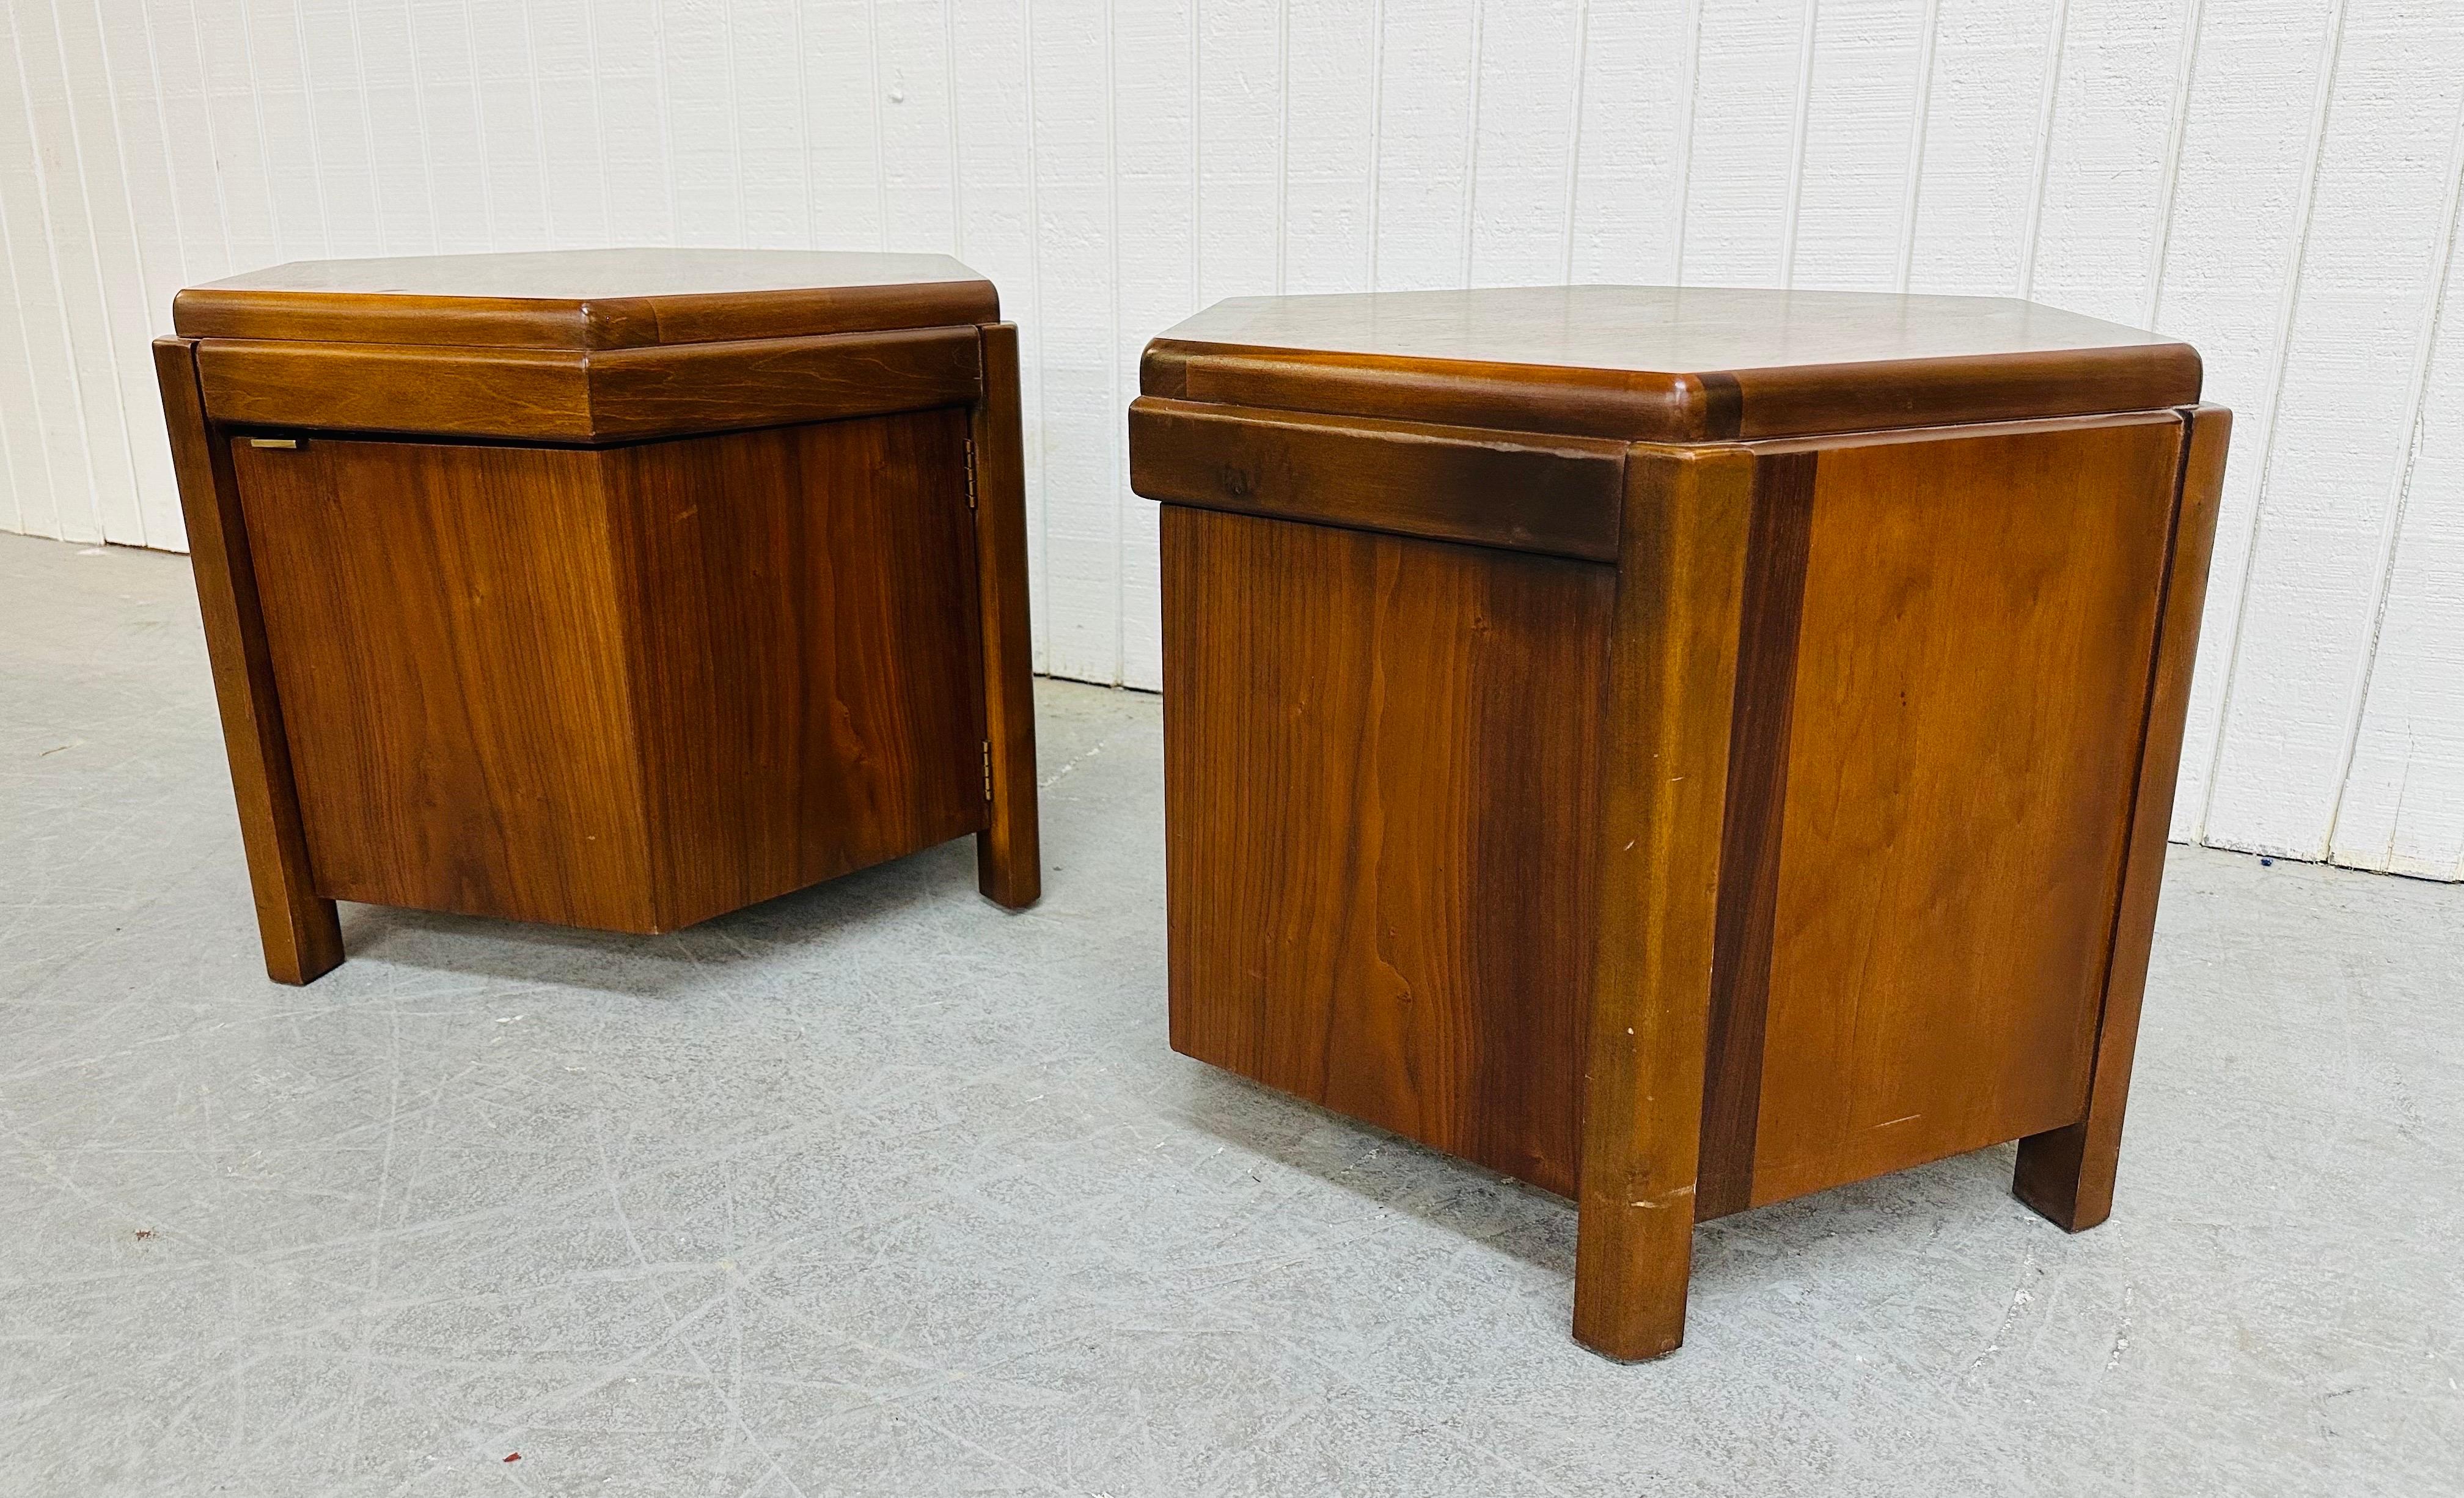 This listing is for a pair of Mid-Century Modern Lane Hexagonal Walnut Side Tables. Featuring a hexagonal design, single door that opens up to storage space, and a beautiful walnut finish. This is an exceptional combination of quality and design by